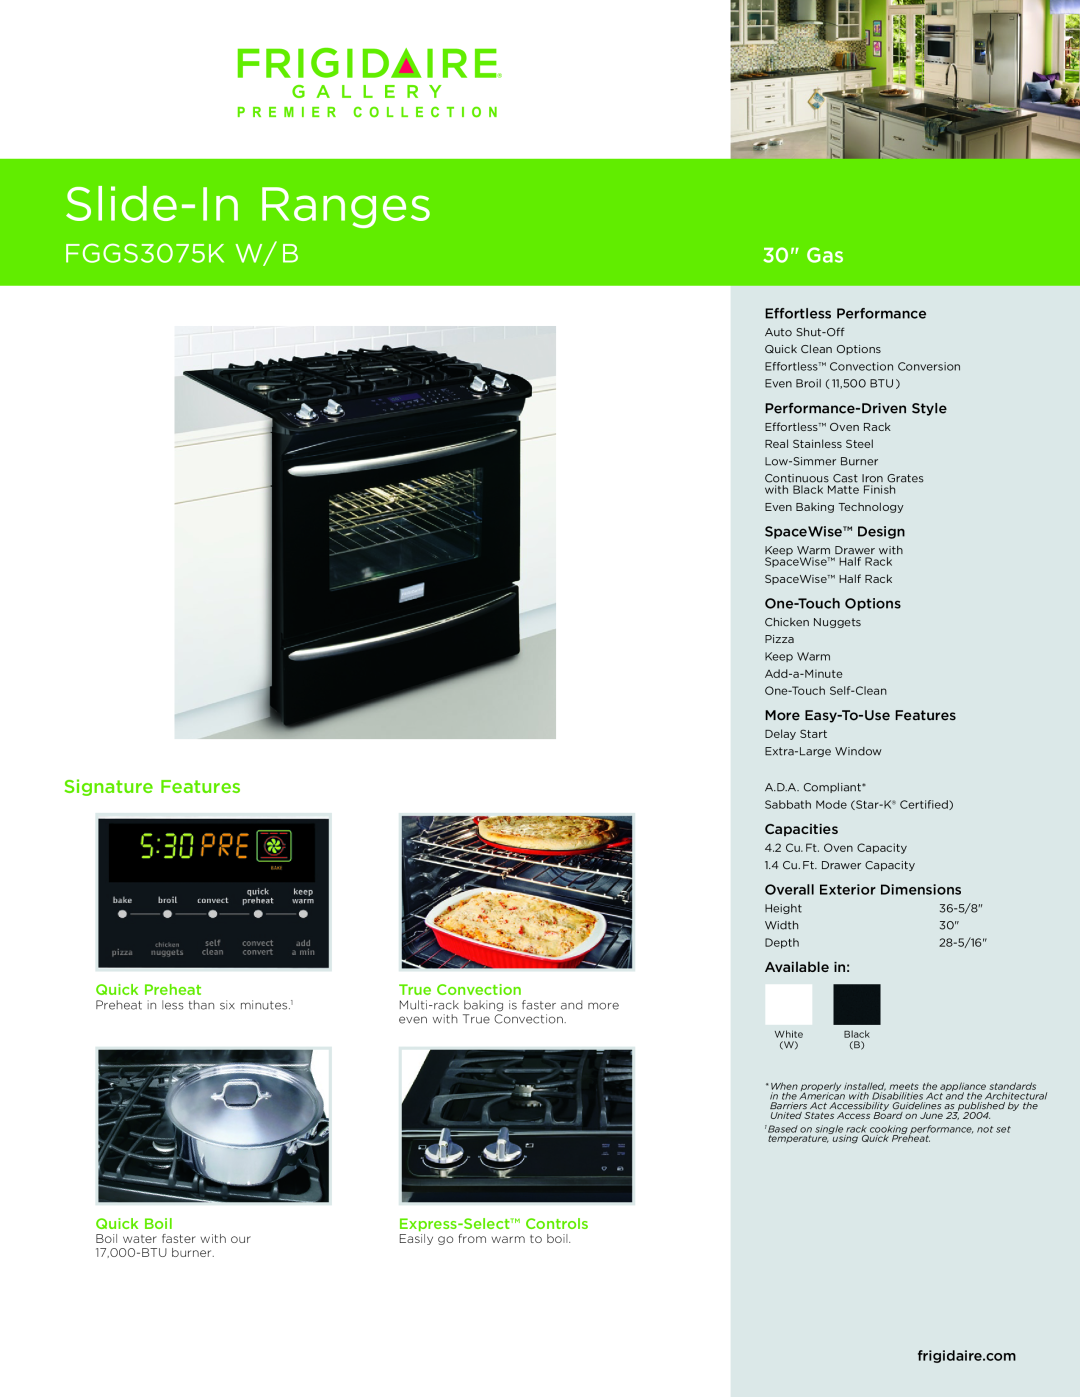 Frigidaire FGGS3075K W/B dimensions Effortless Performance, Performance-DrivenStyle, SpaceWise Design, One-TouchOptions 